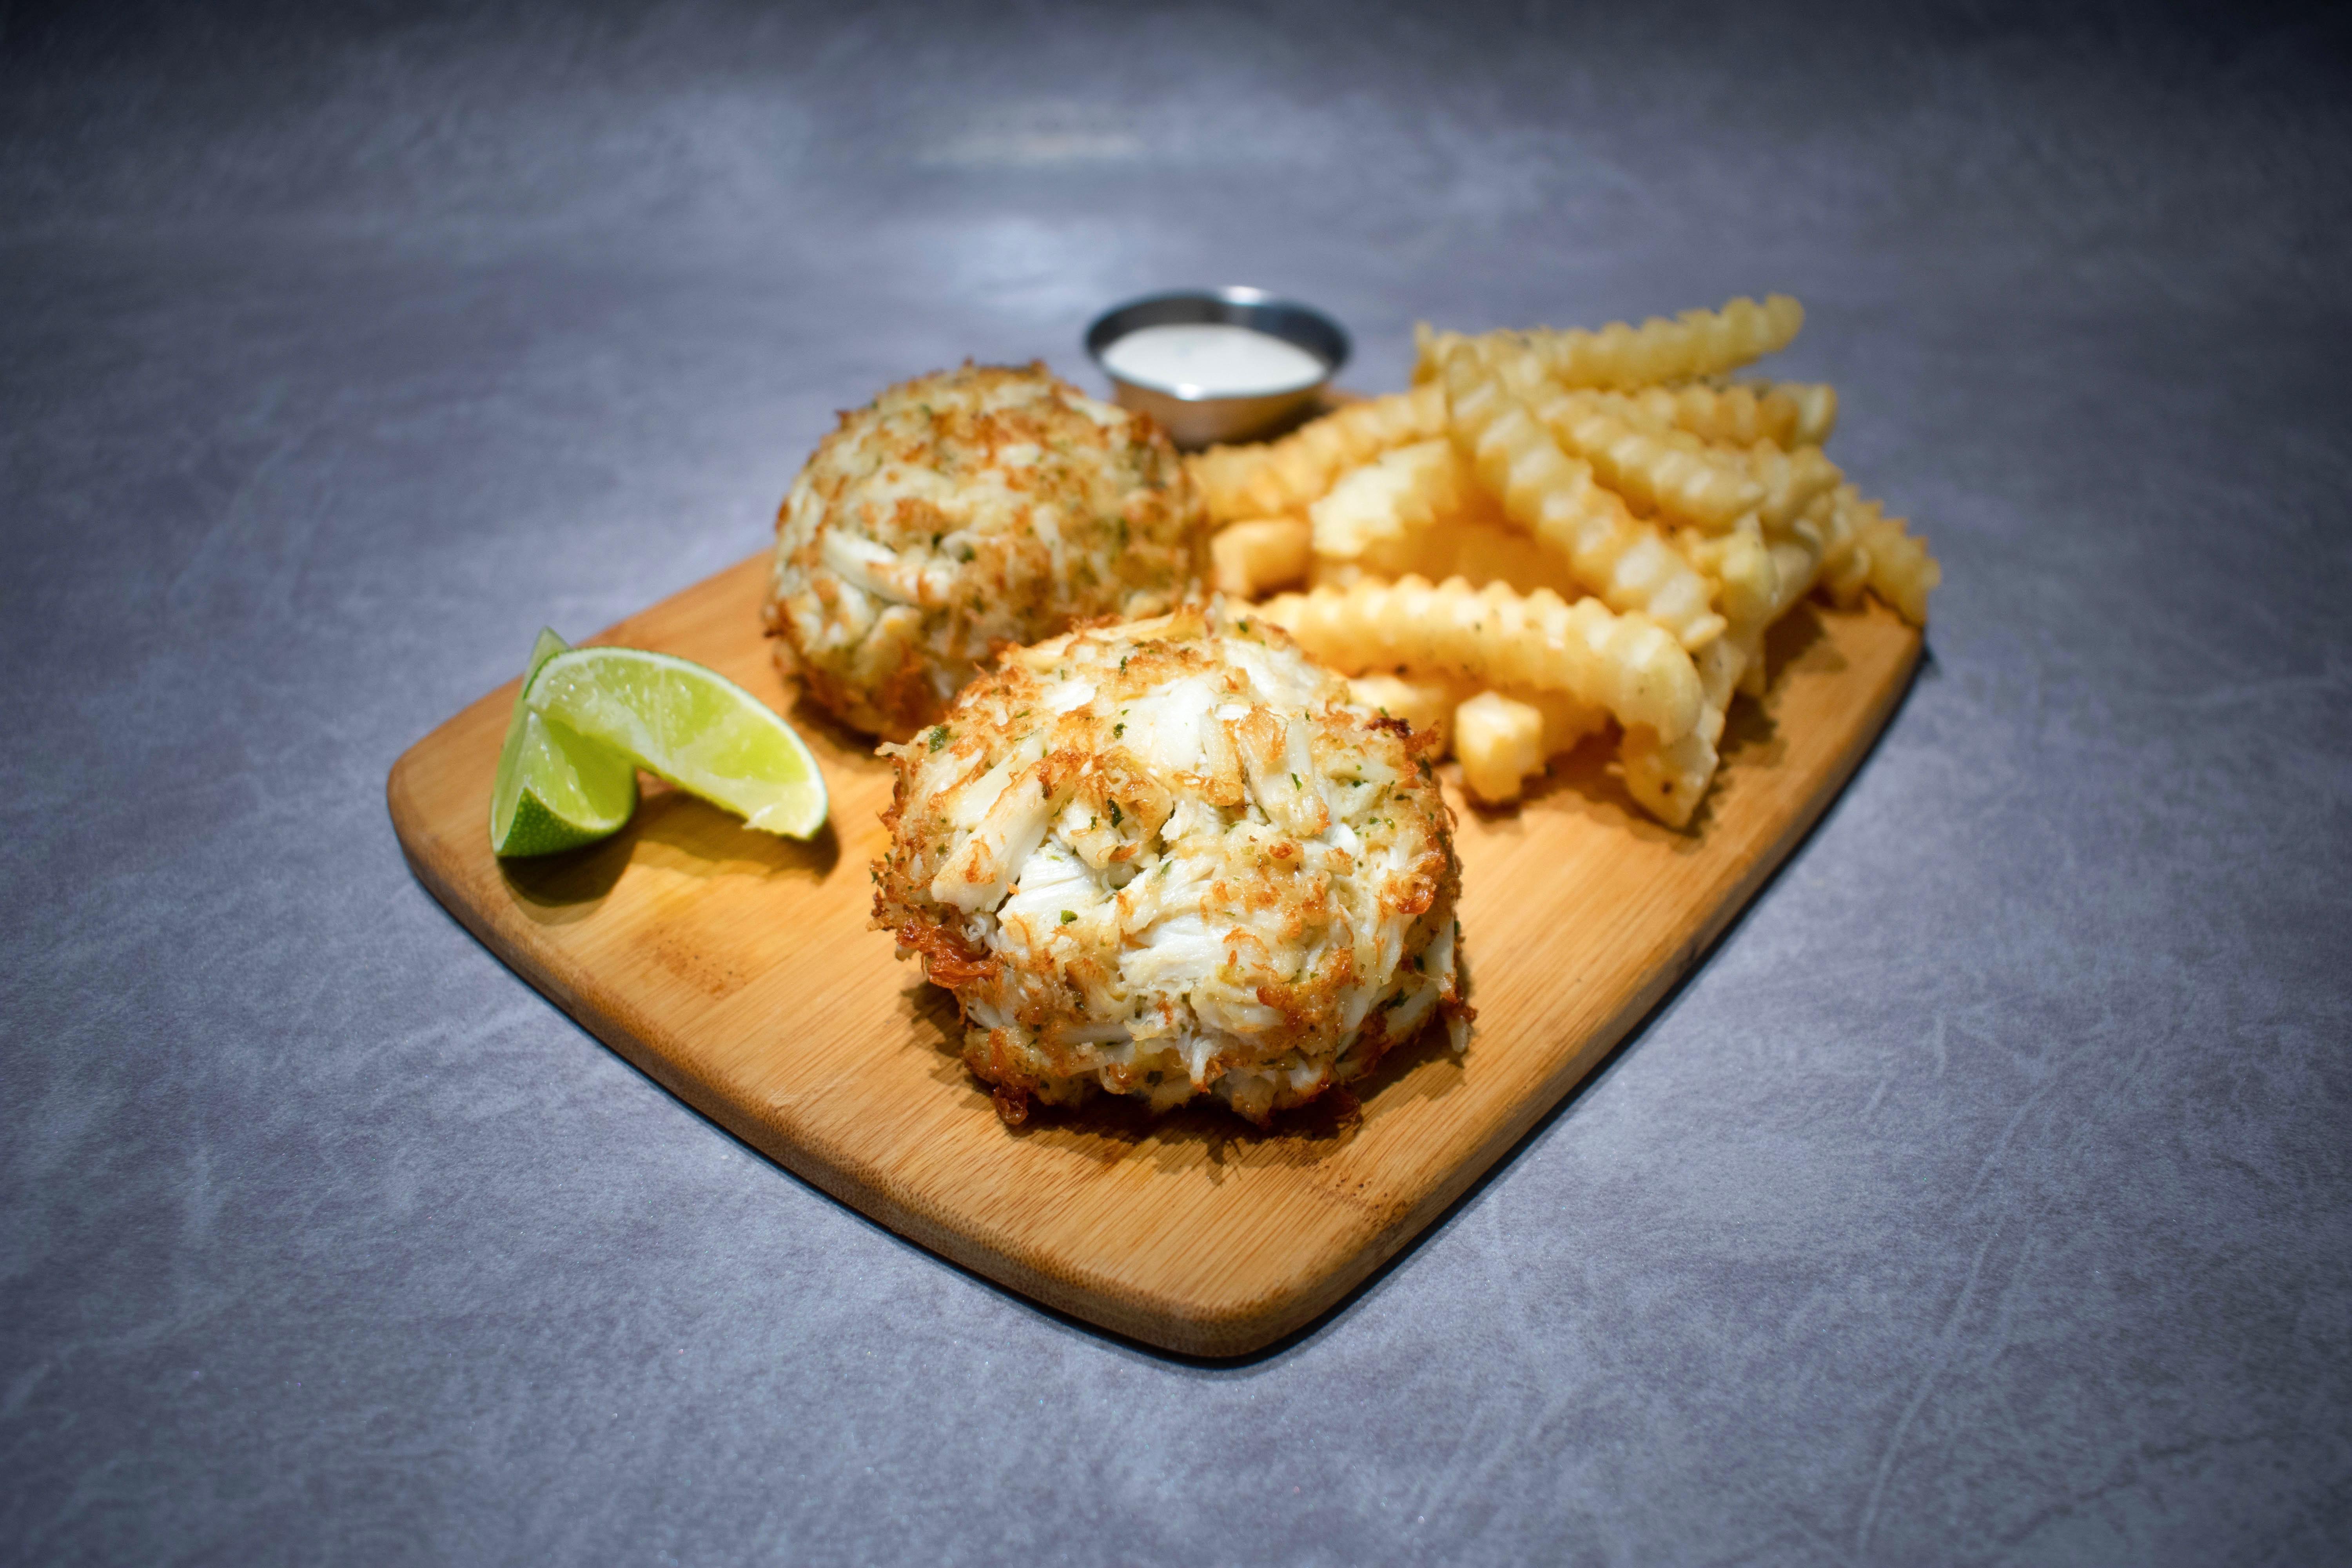 Crab Cakes and fries